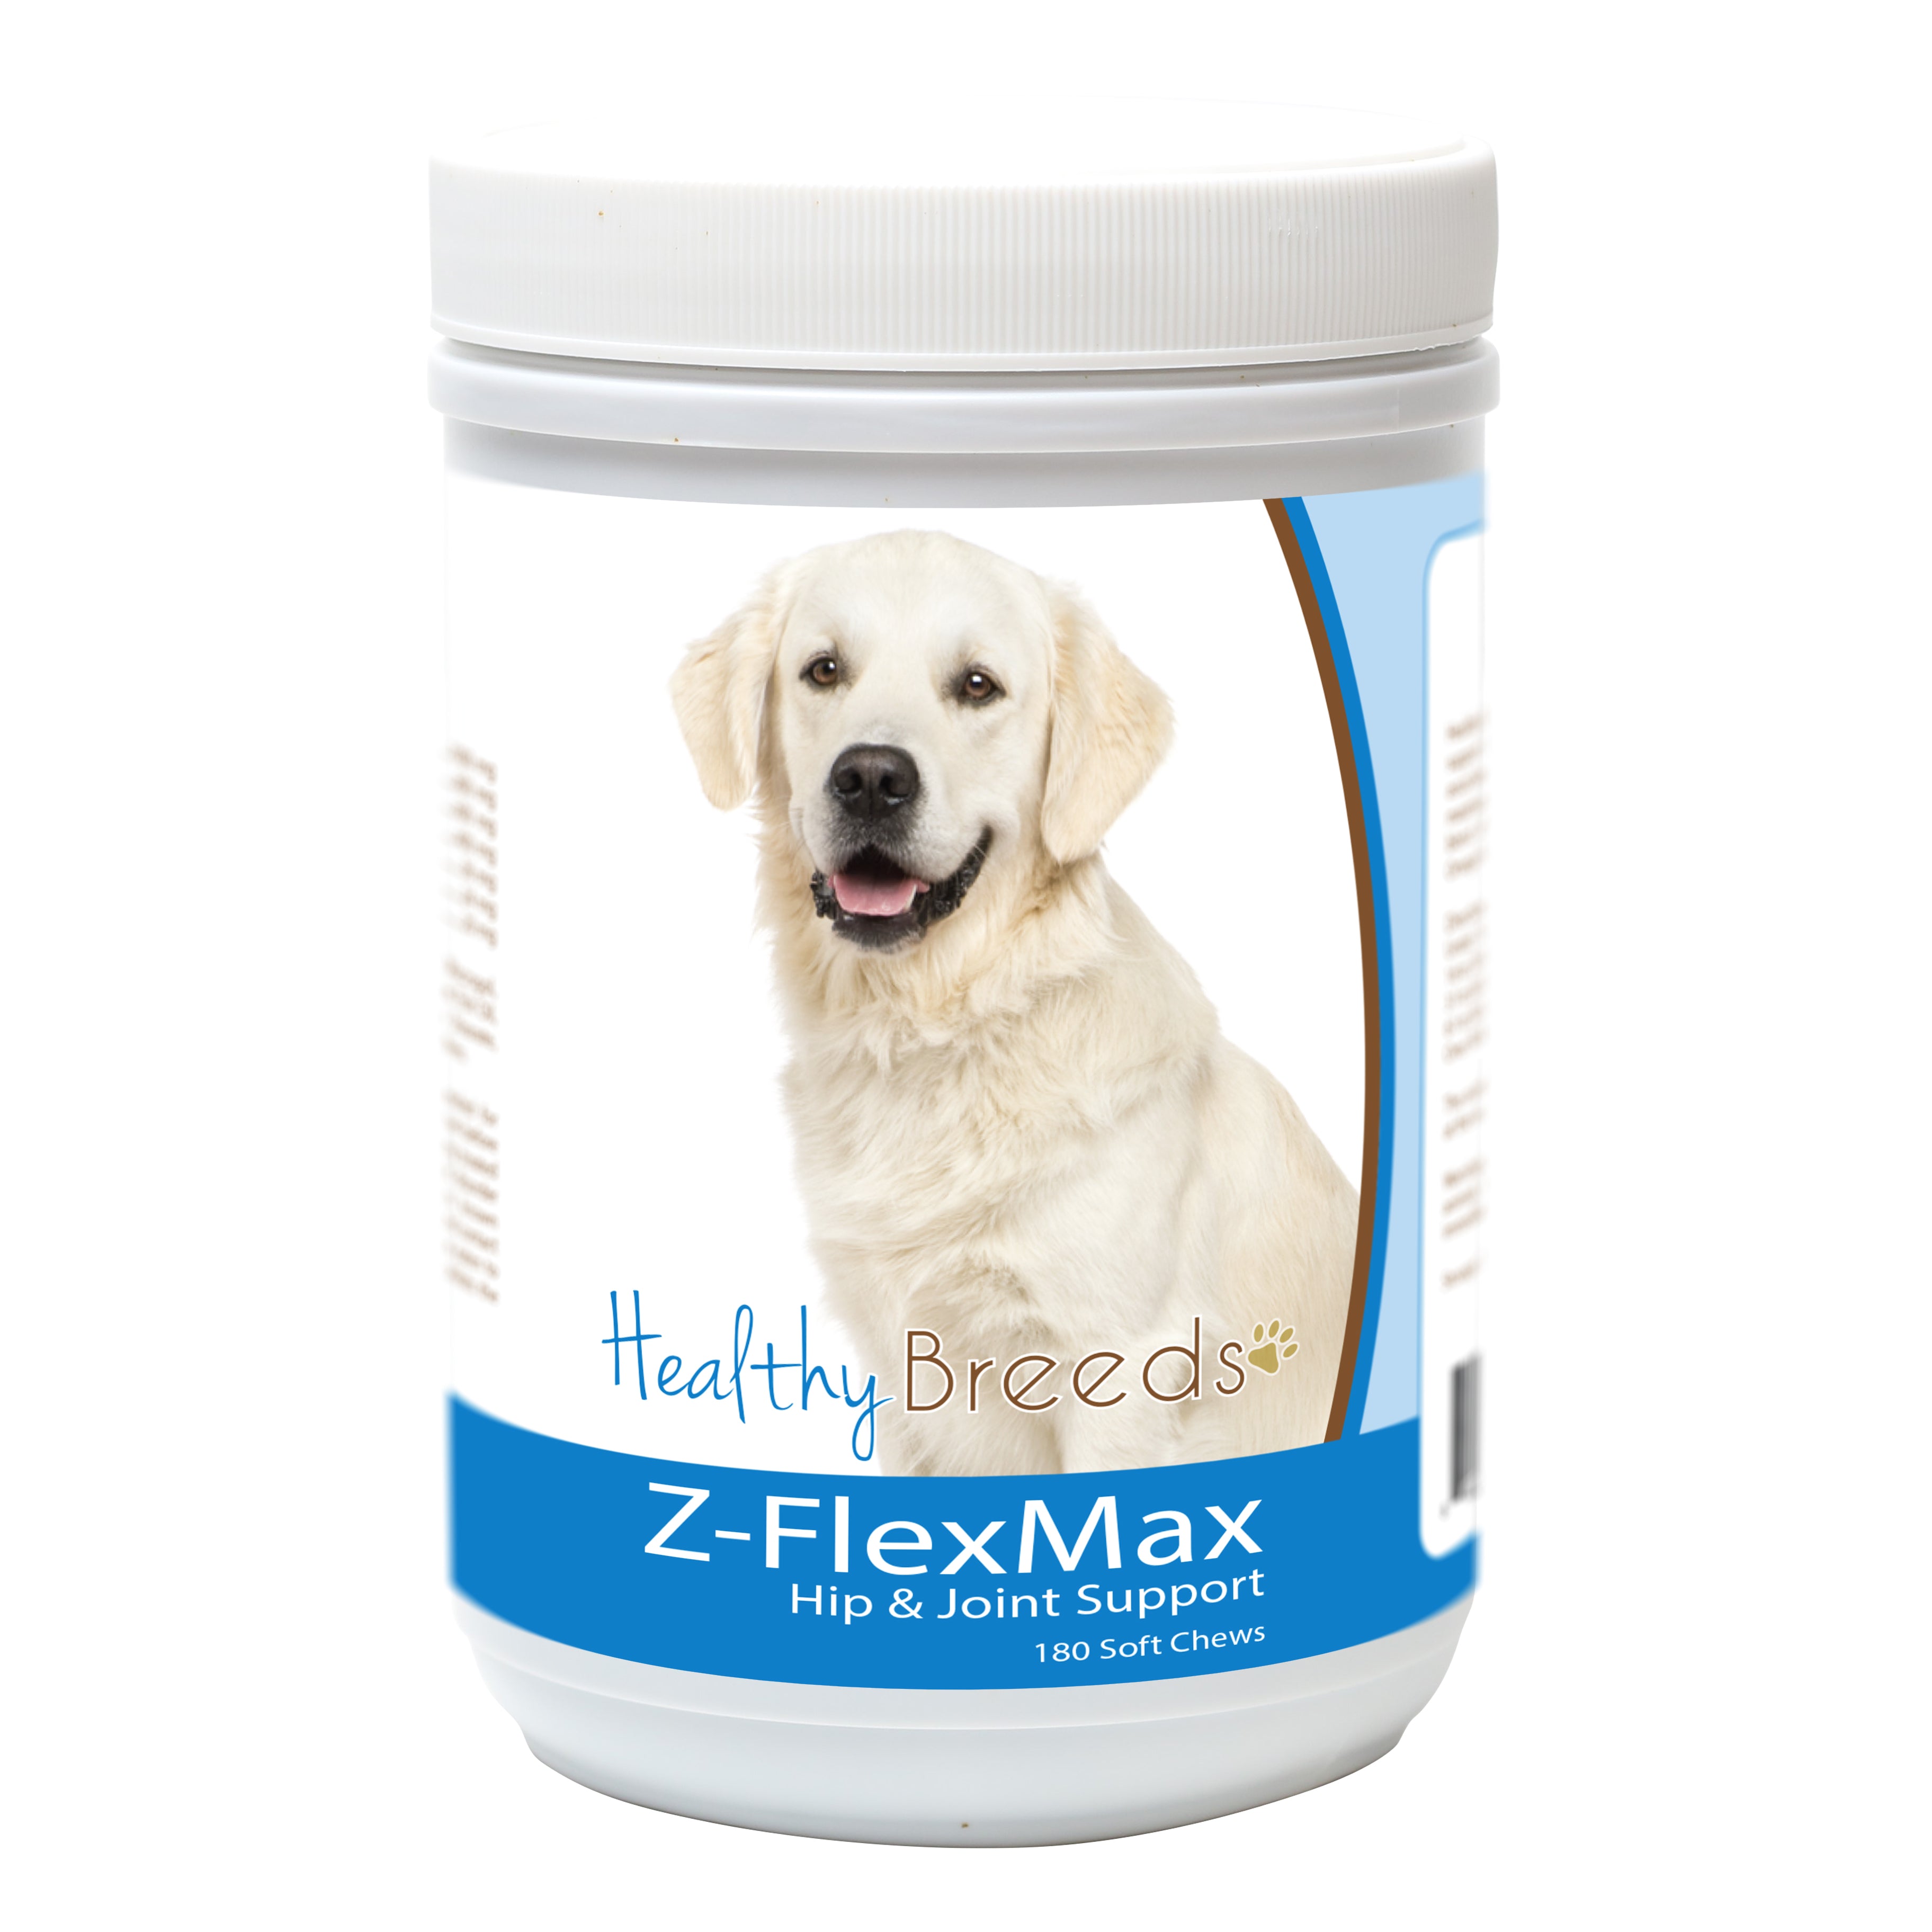 Golden Retriever Z-Flex Max Dog Hip and Joint Support 180 Count